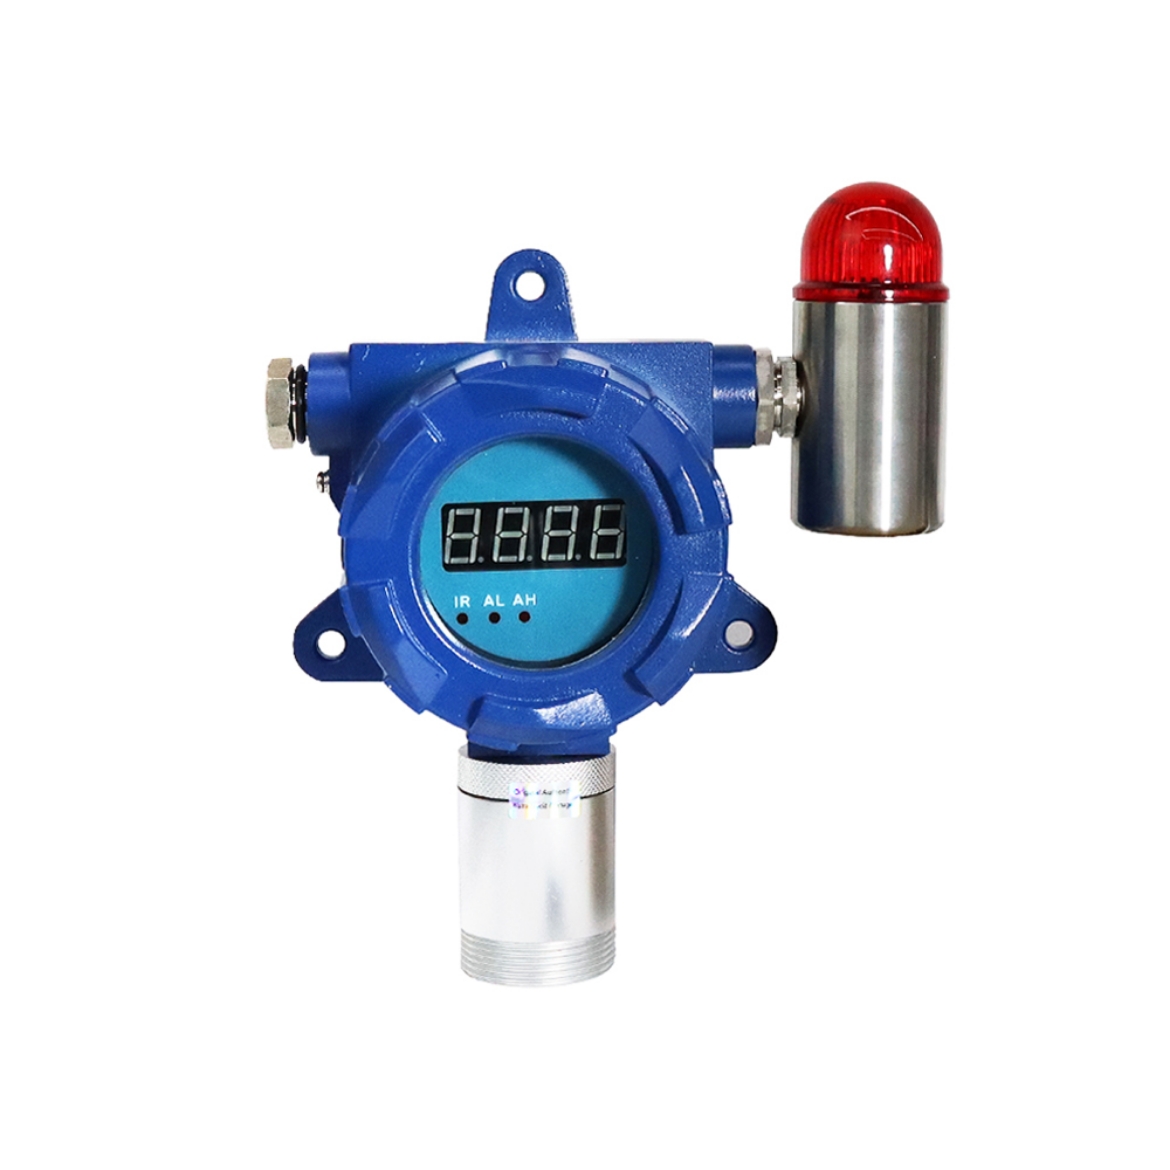 Fixed Hydrocarbons (HC) Gas Detector